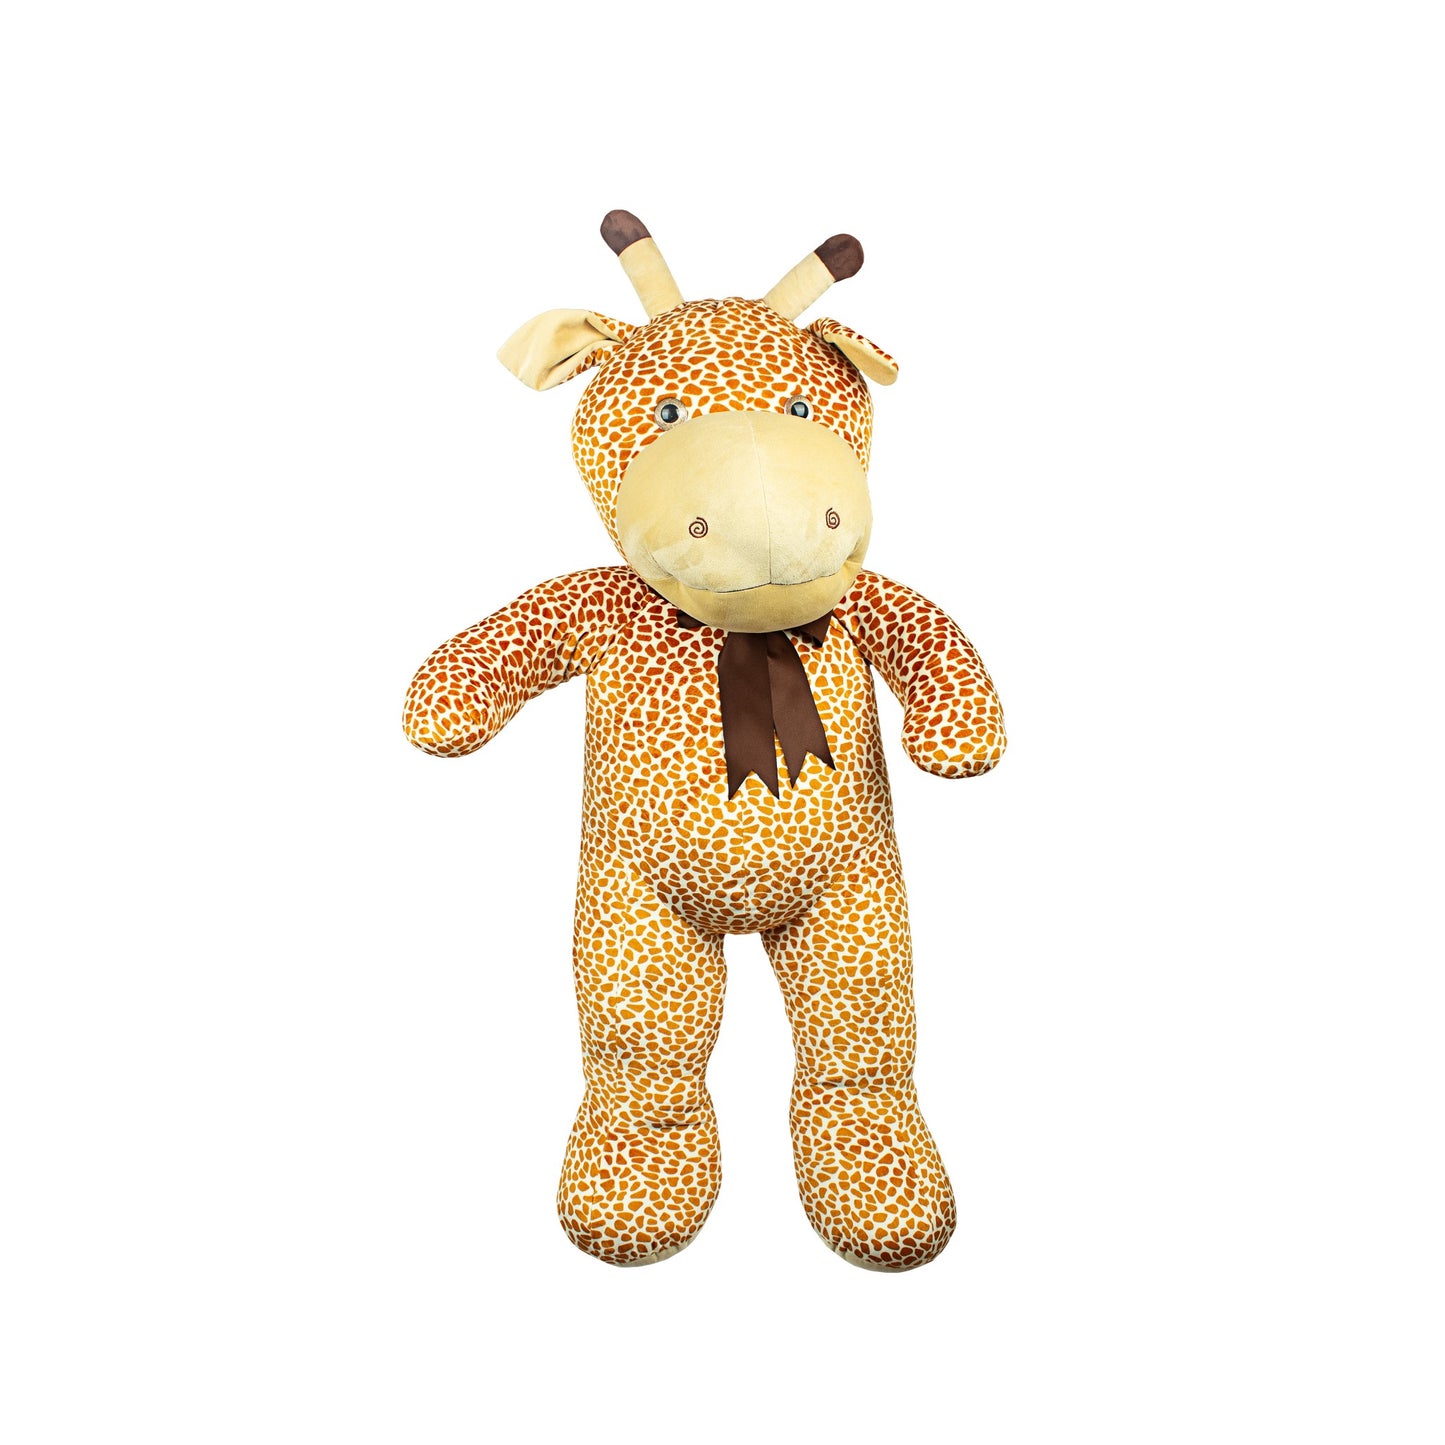 Giraffe Soft Toy | Large Size - 4 ft tynimo